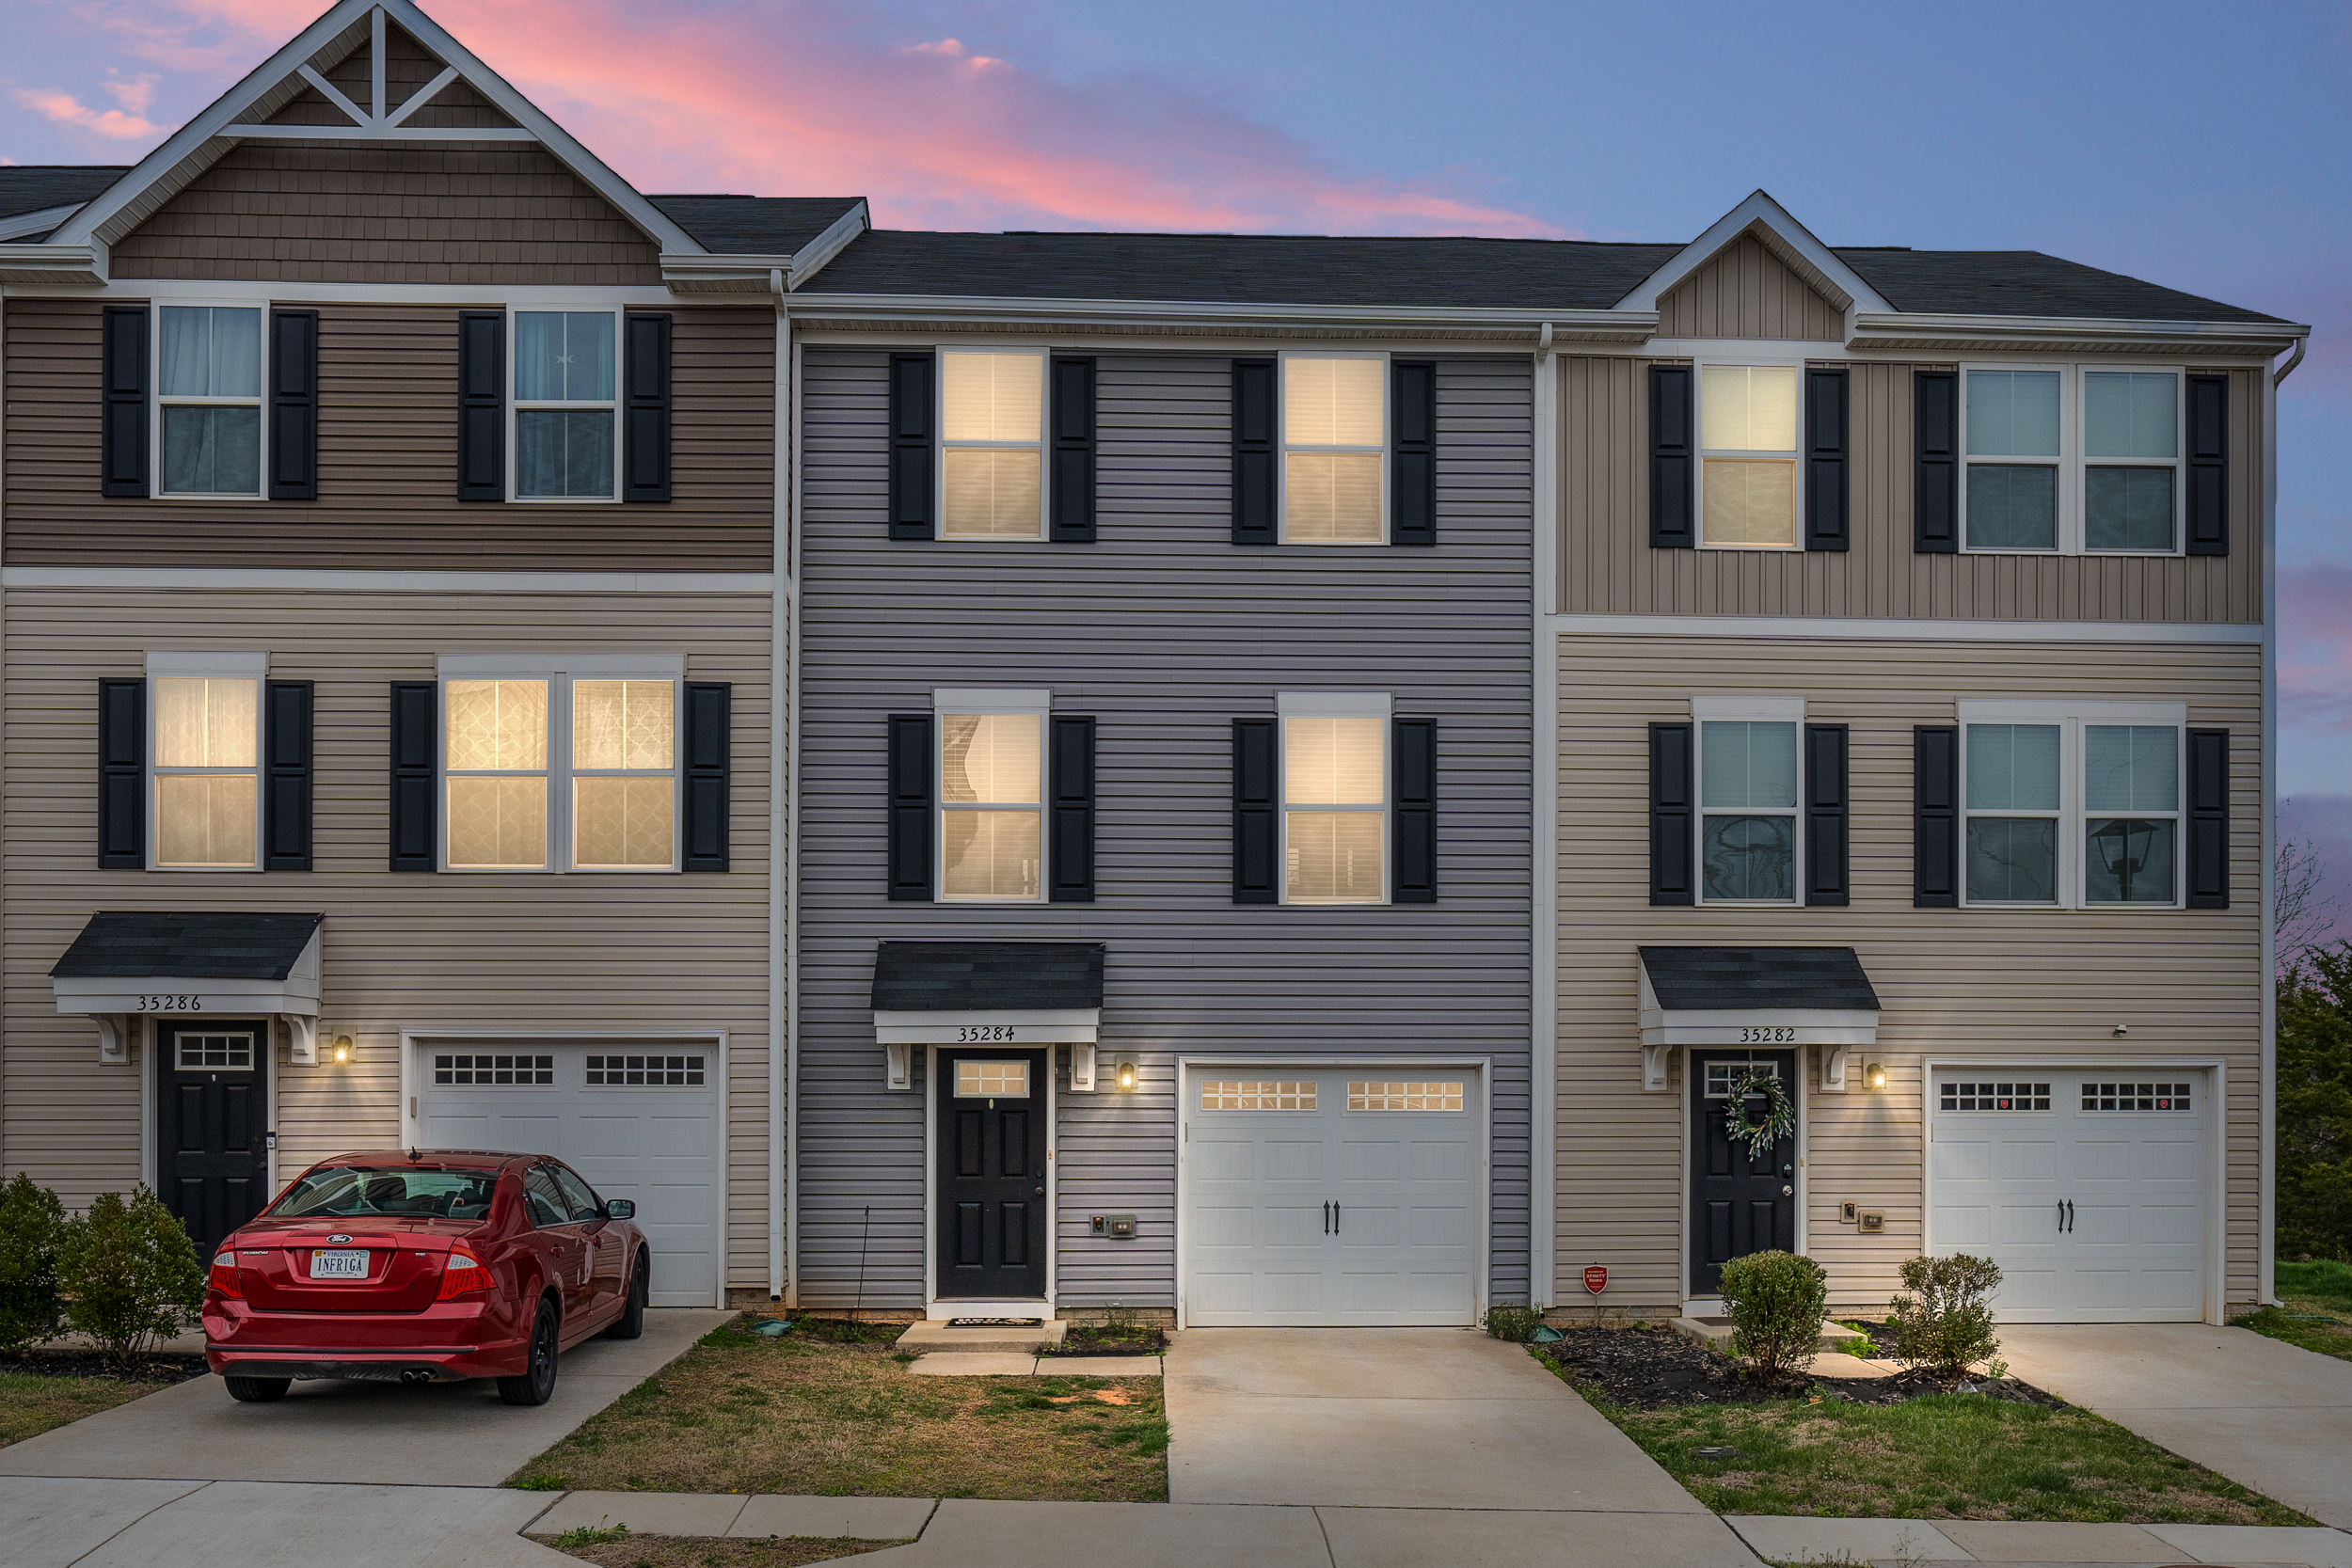 Townhomes for sale in Fredericksburg | Locust Grove